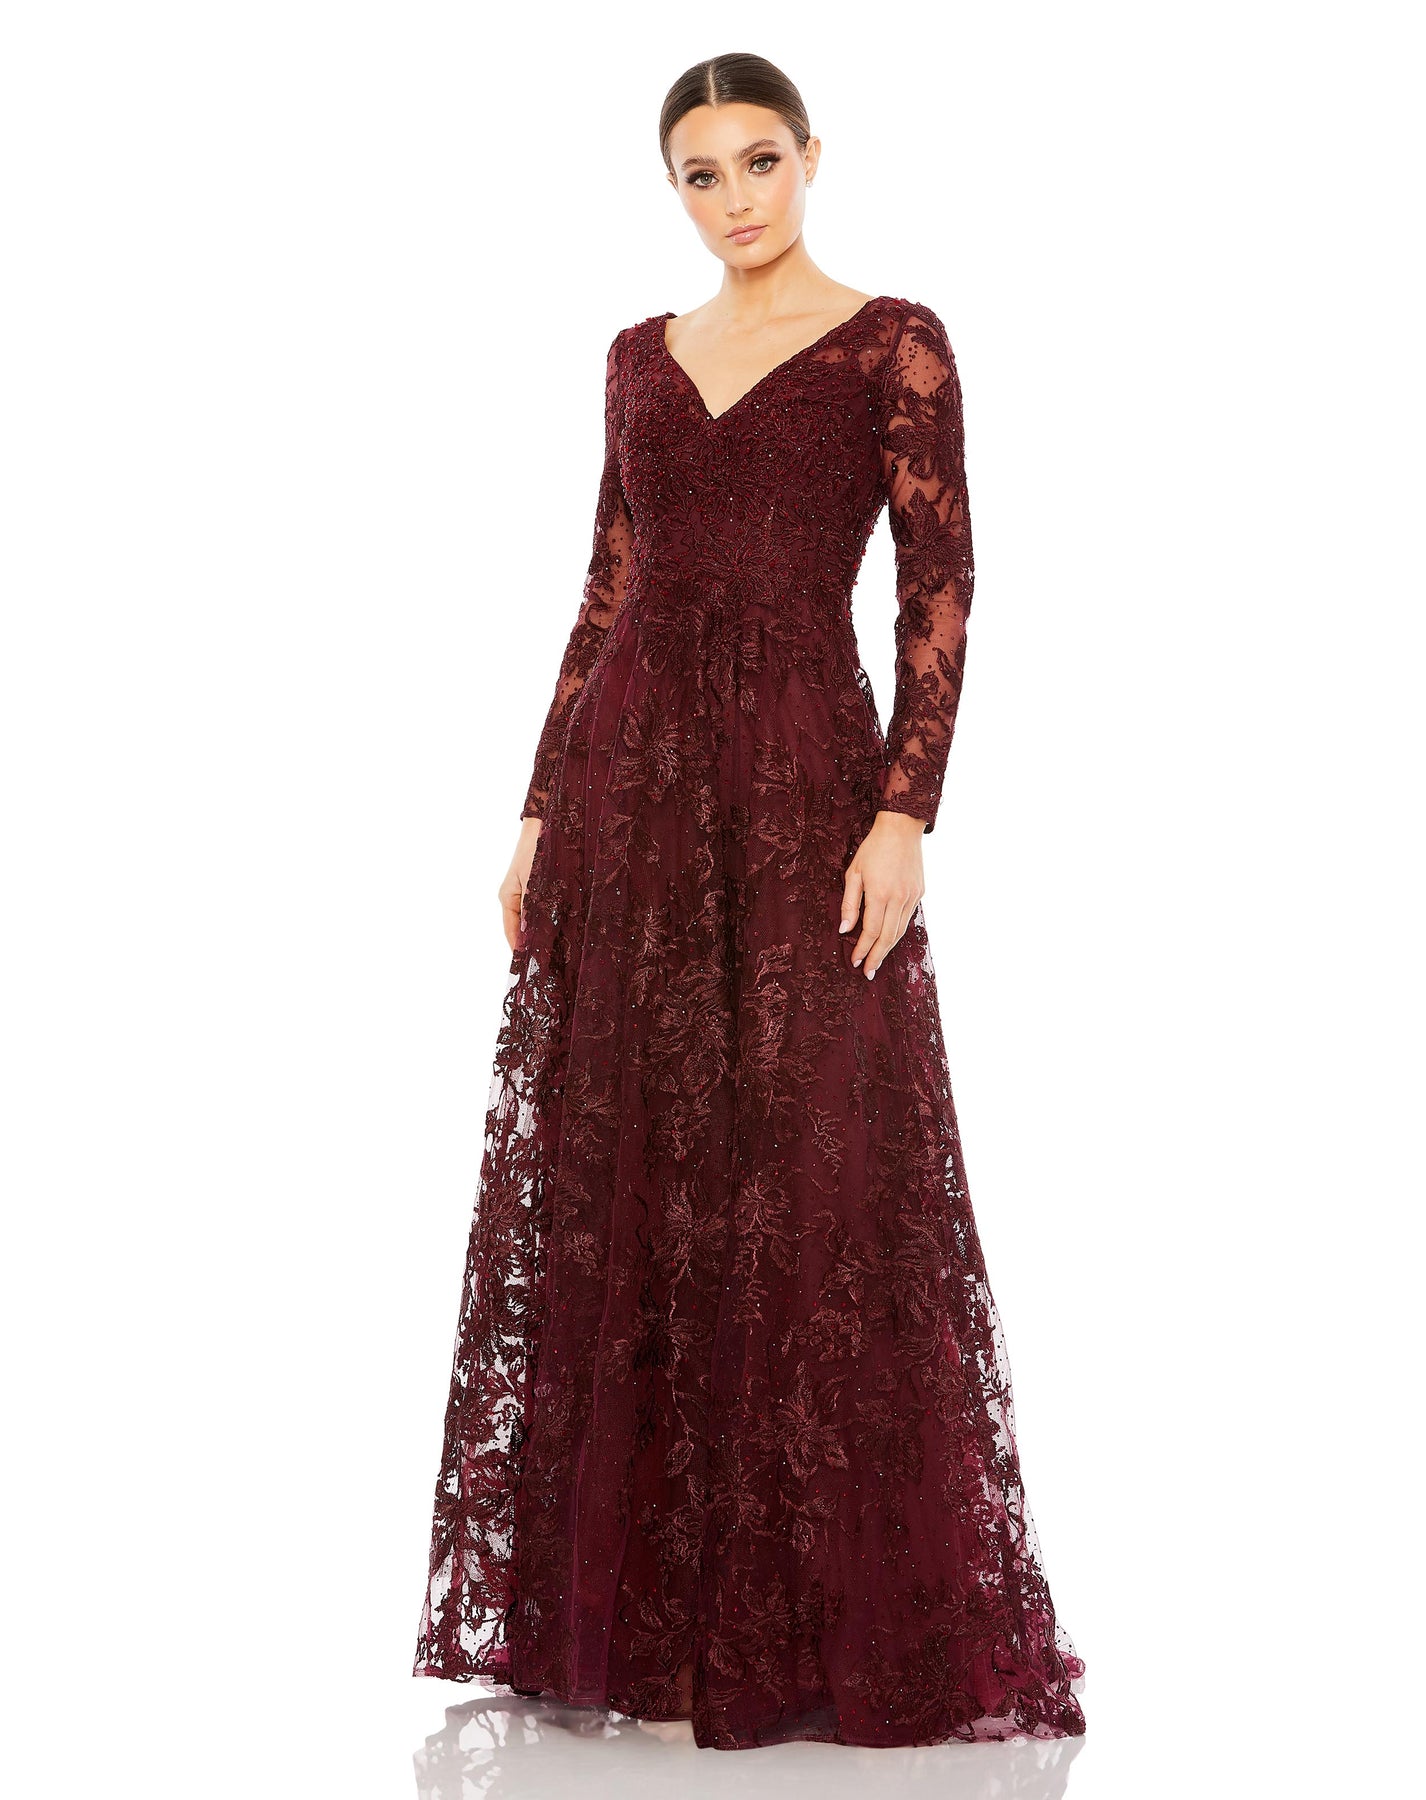 Embellished Illusion Long Sleeve V Neck Gown – Mac Duggal